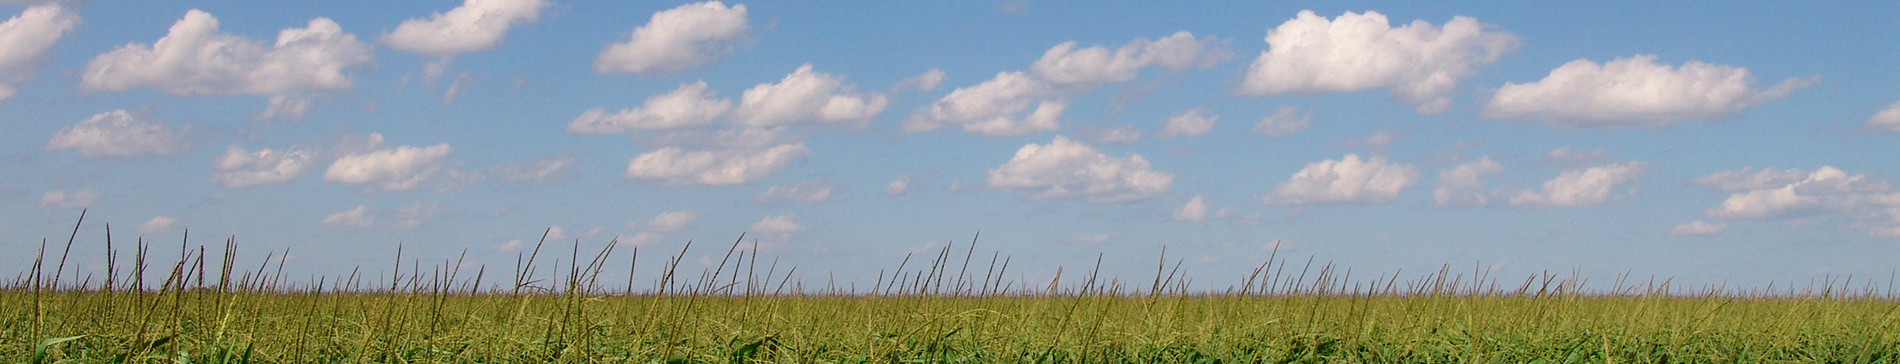 field with a blue sky and clouds